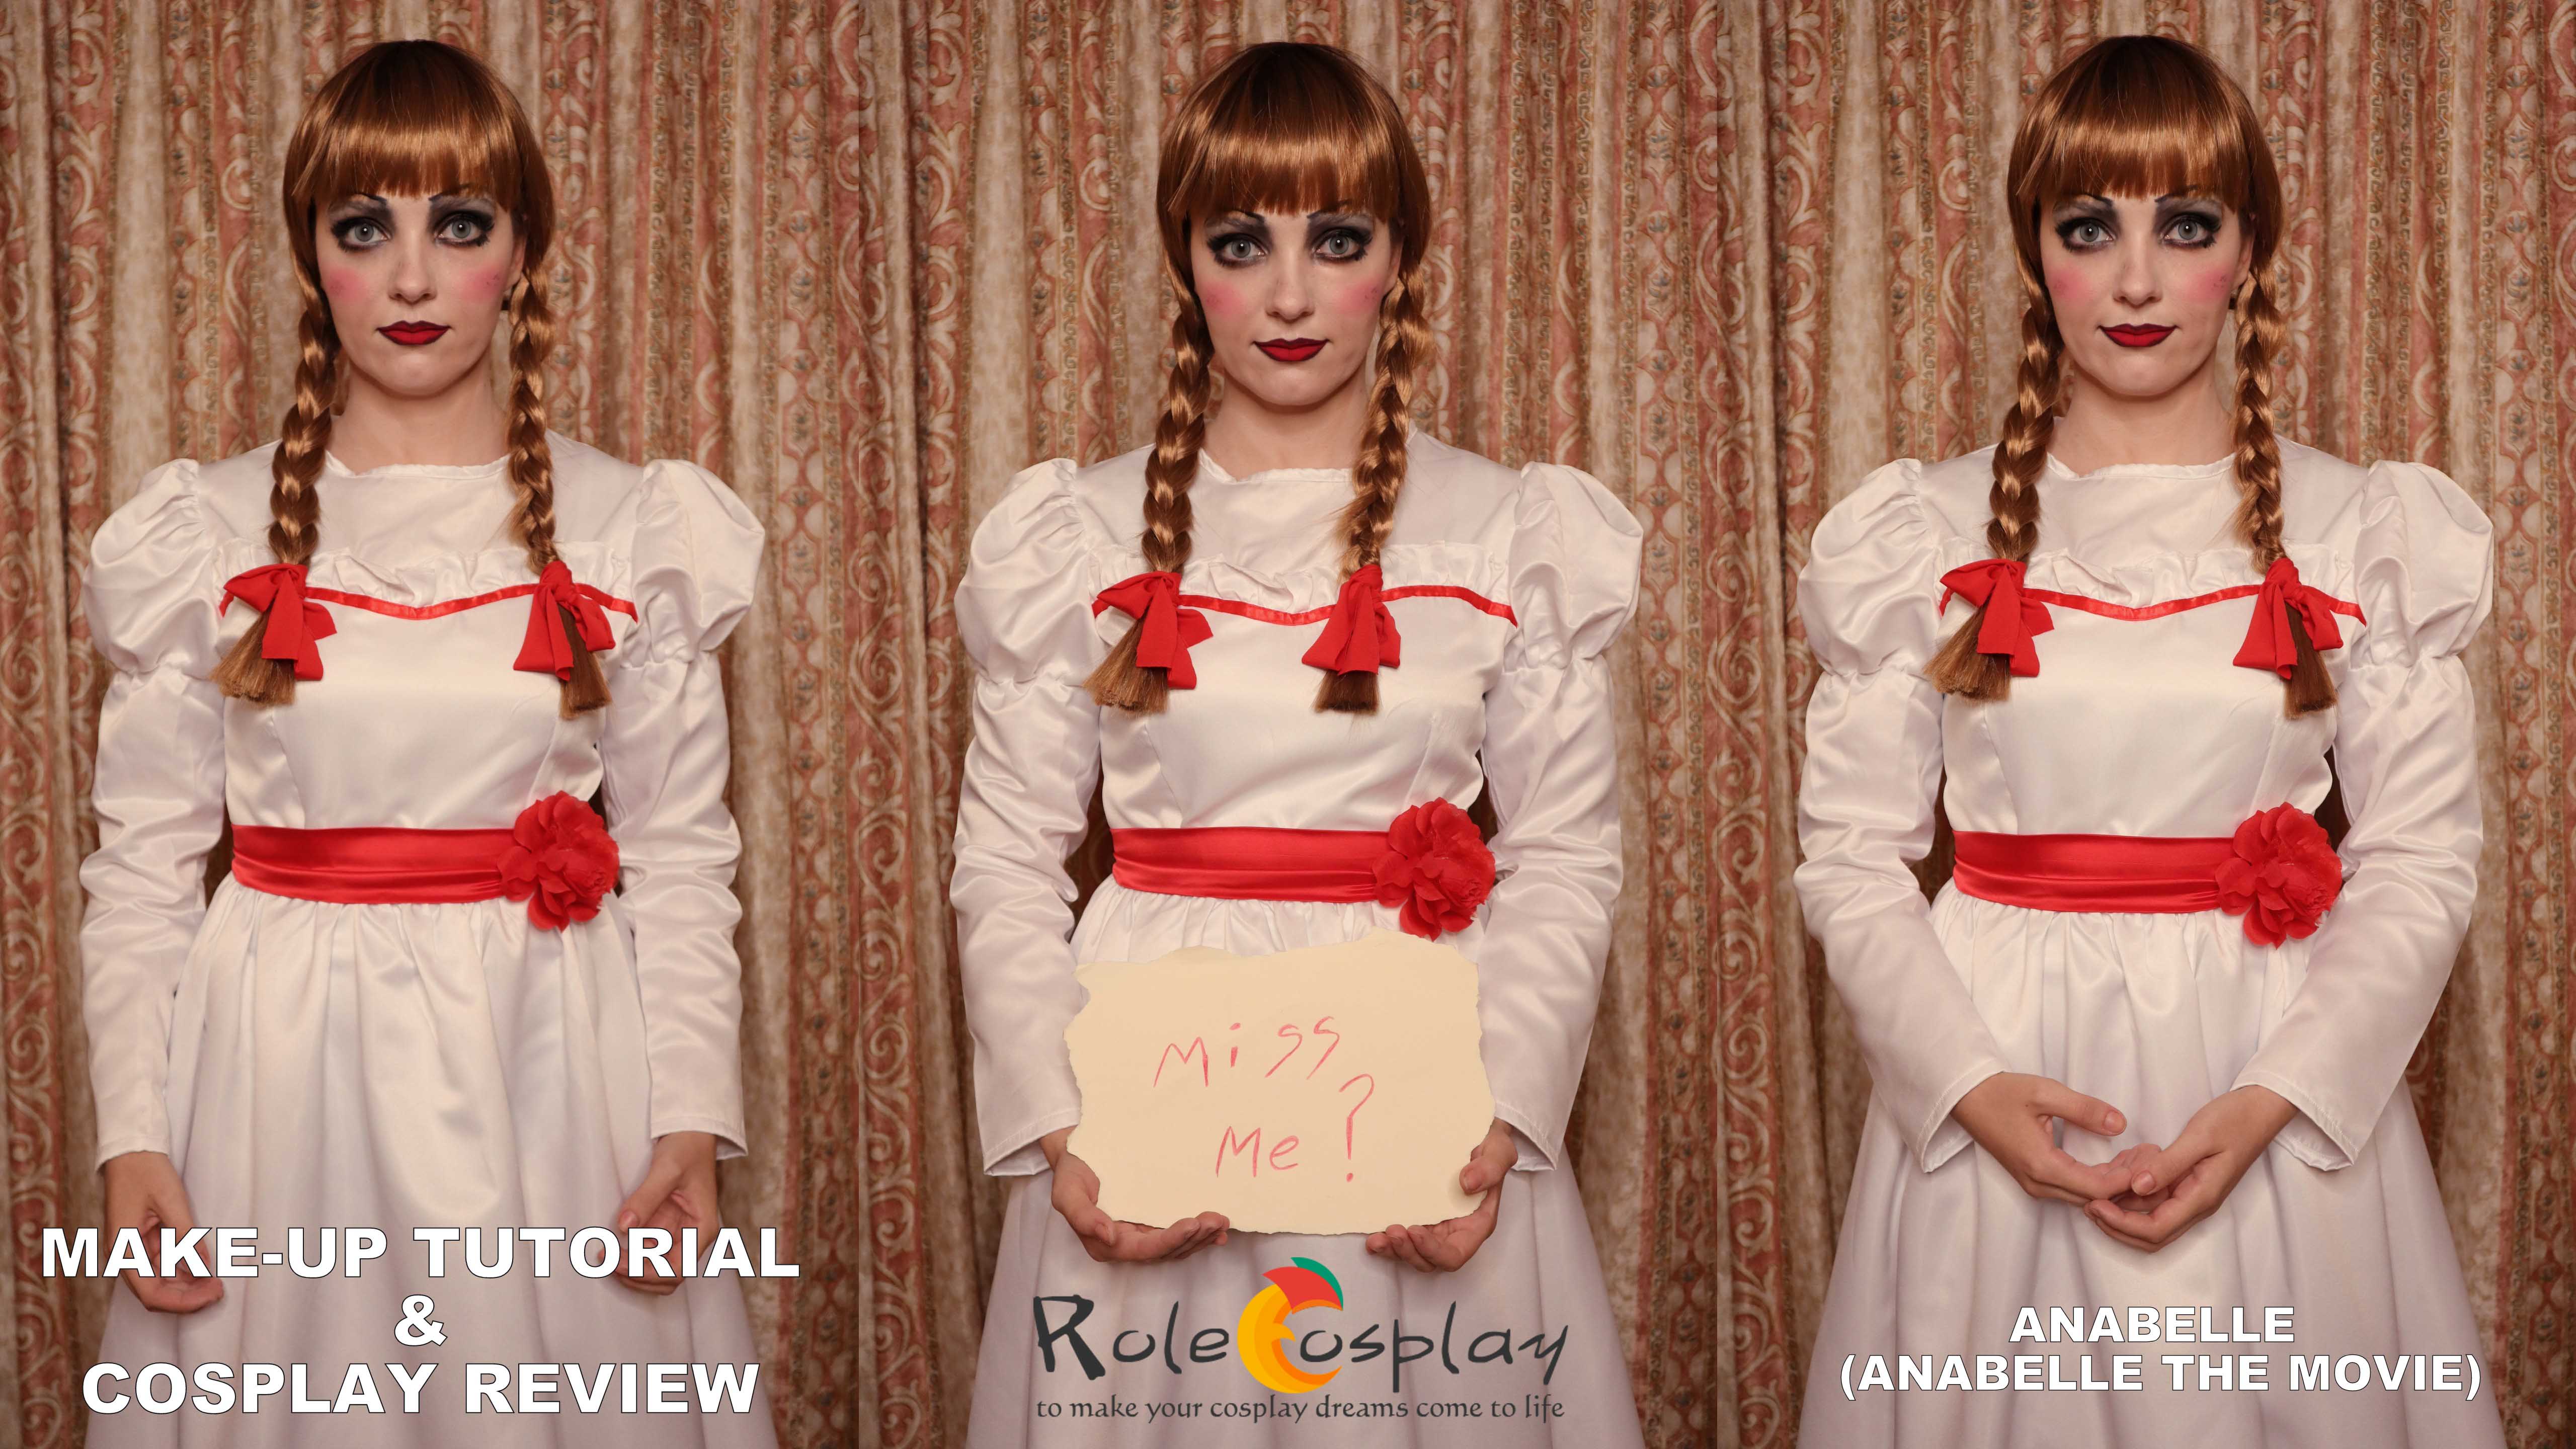 Costume Review & Make-up Tutorial: Anabelle (Anabelle The Movie) from Rolecosplay